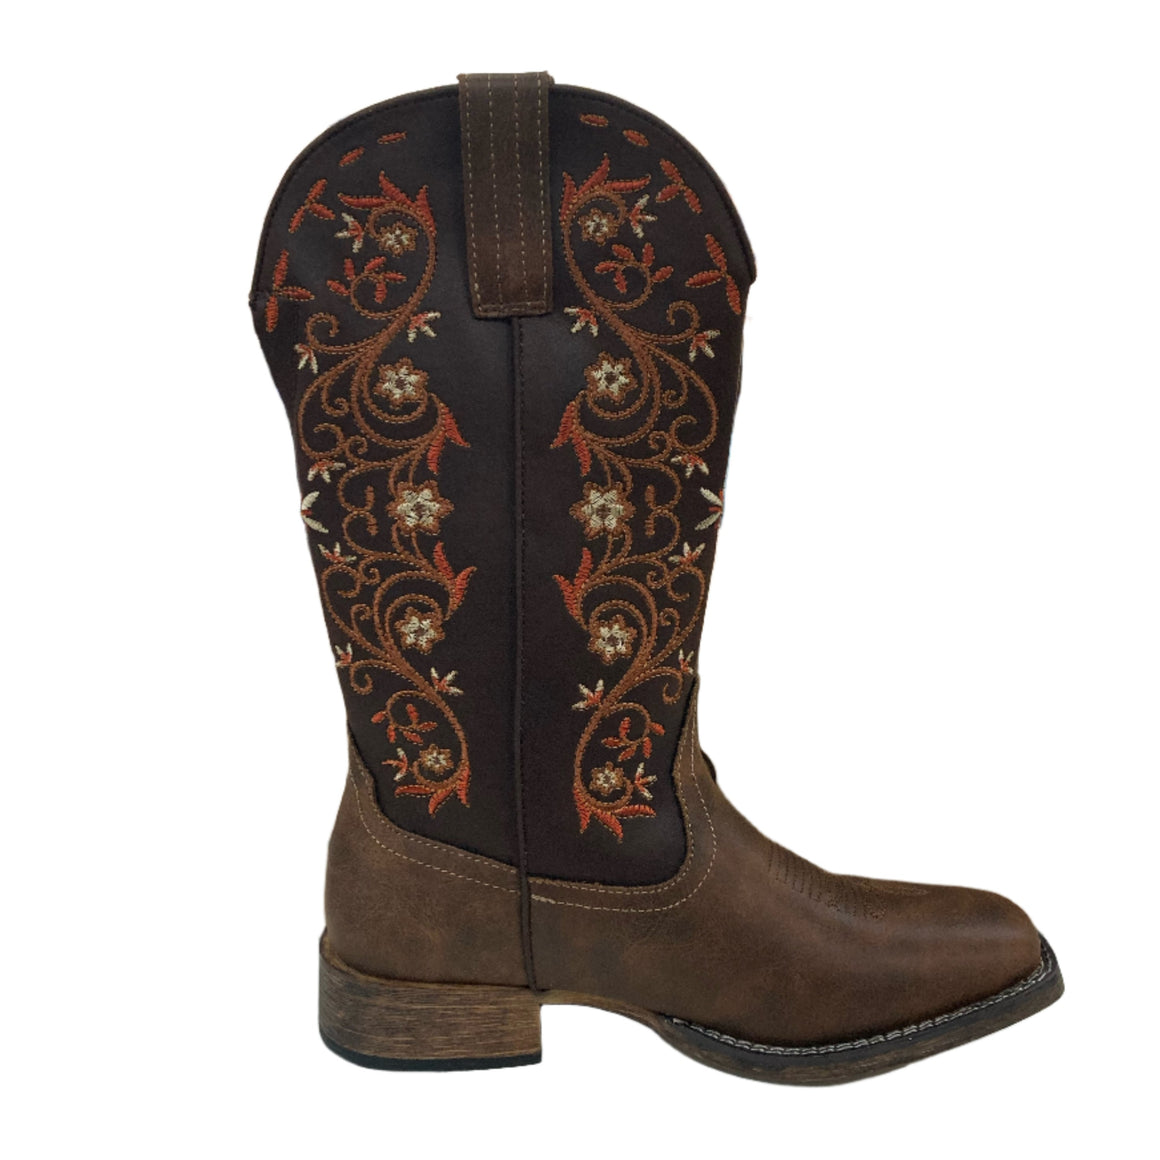 Roper Womens Bailey Boot - Brown/Chocolate Embroidered